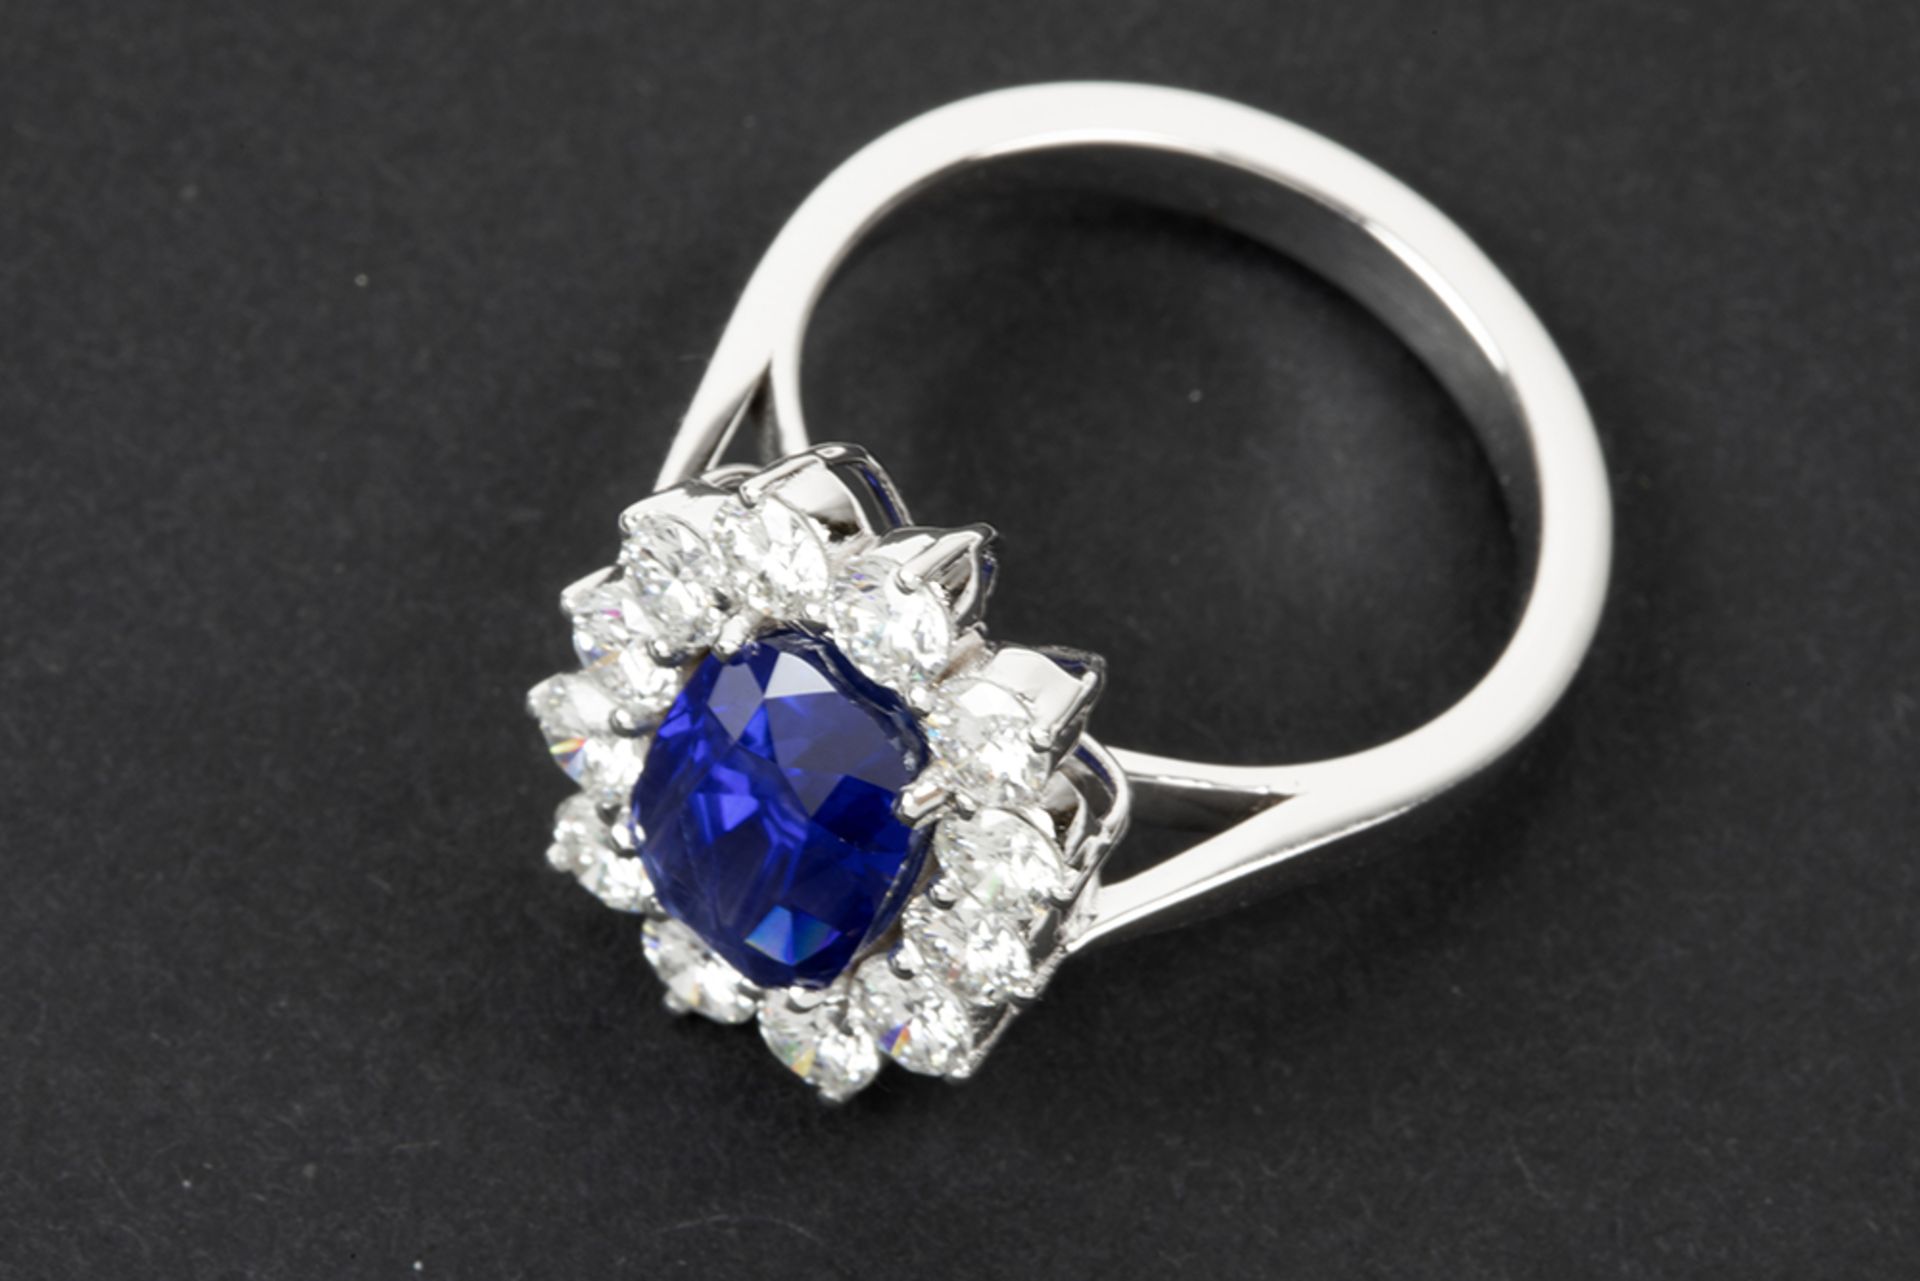 ring in white gold (18 carat) with an oval 4,20 carat non-heated Sri Lankan sapphire surrounded by - Bild 2 aus 2